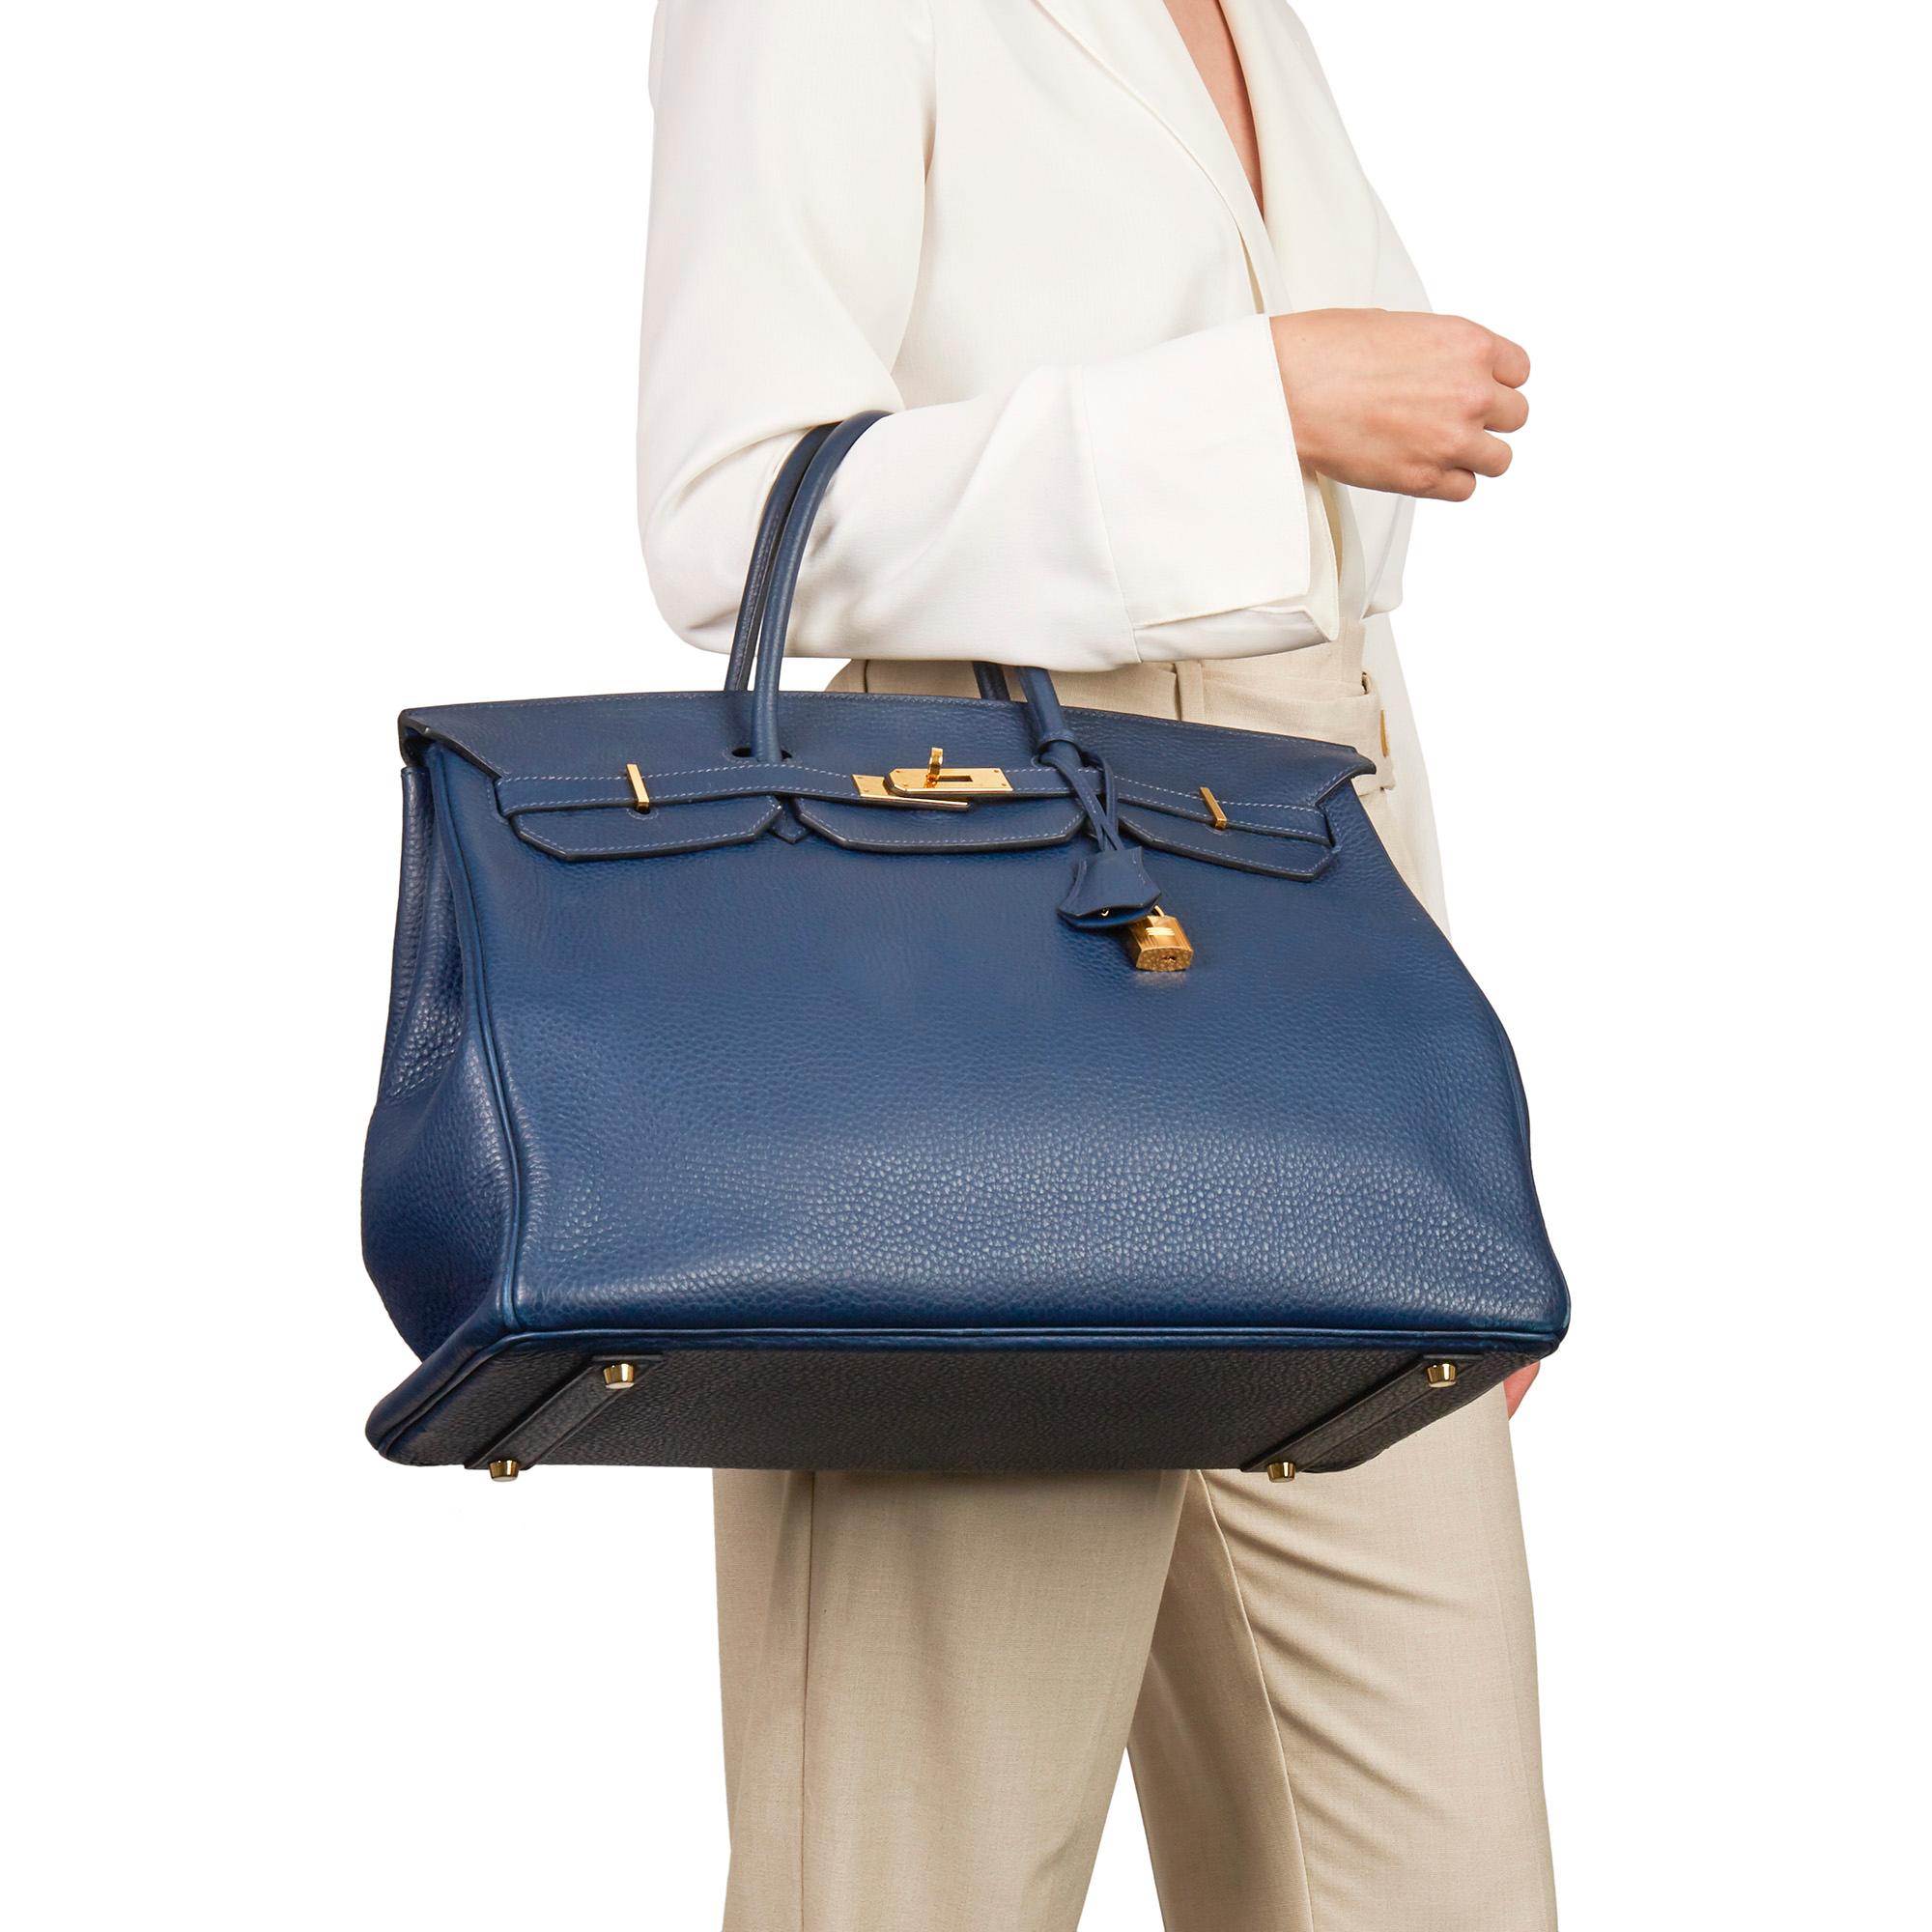 HERMÈS
Bleu de Malte Clemence Leather Birkin 40cm

Xupes Reference: HB3047
Serial Number: [N]
Age (Circa): 2010
Accompanied By: Lock, Keys, Clochette
Gender: Ladies
Type: Tote

Colour: Bleu de Malte
Hardware: Gold
Material(s): Clemence